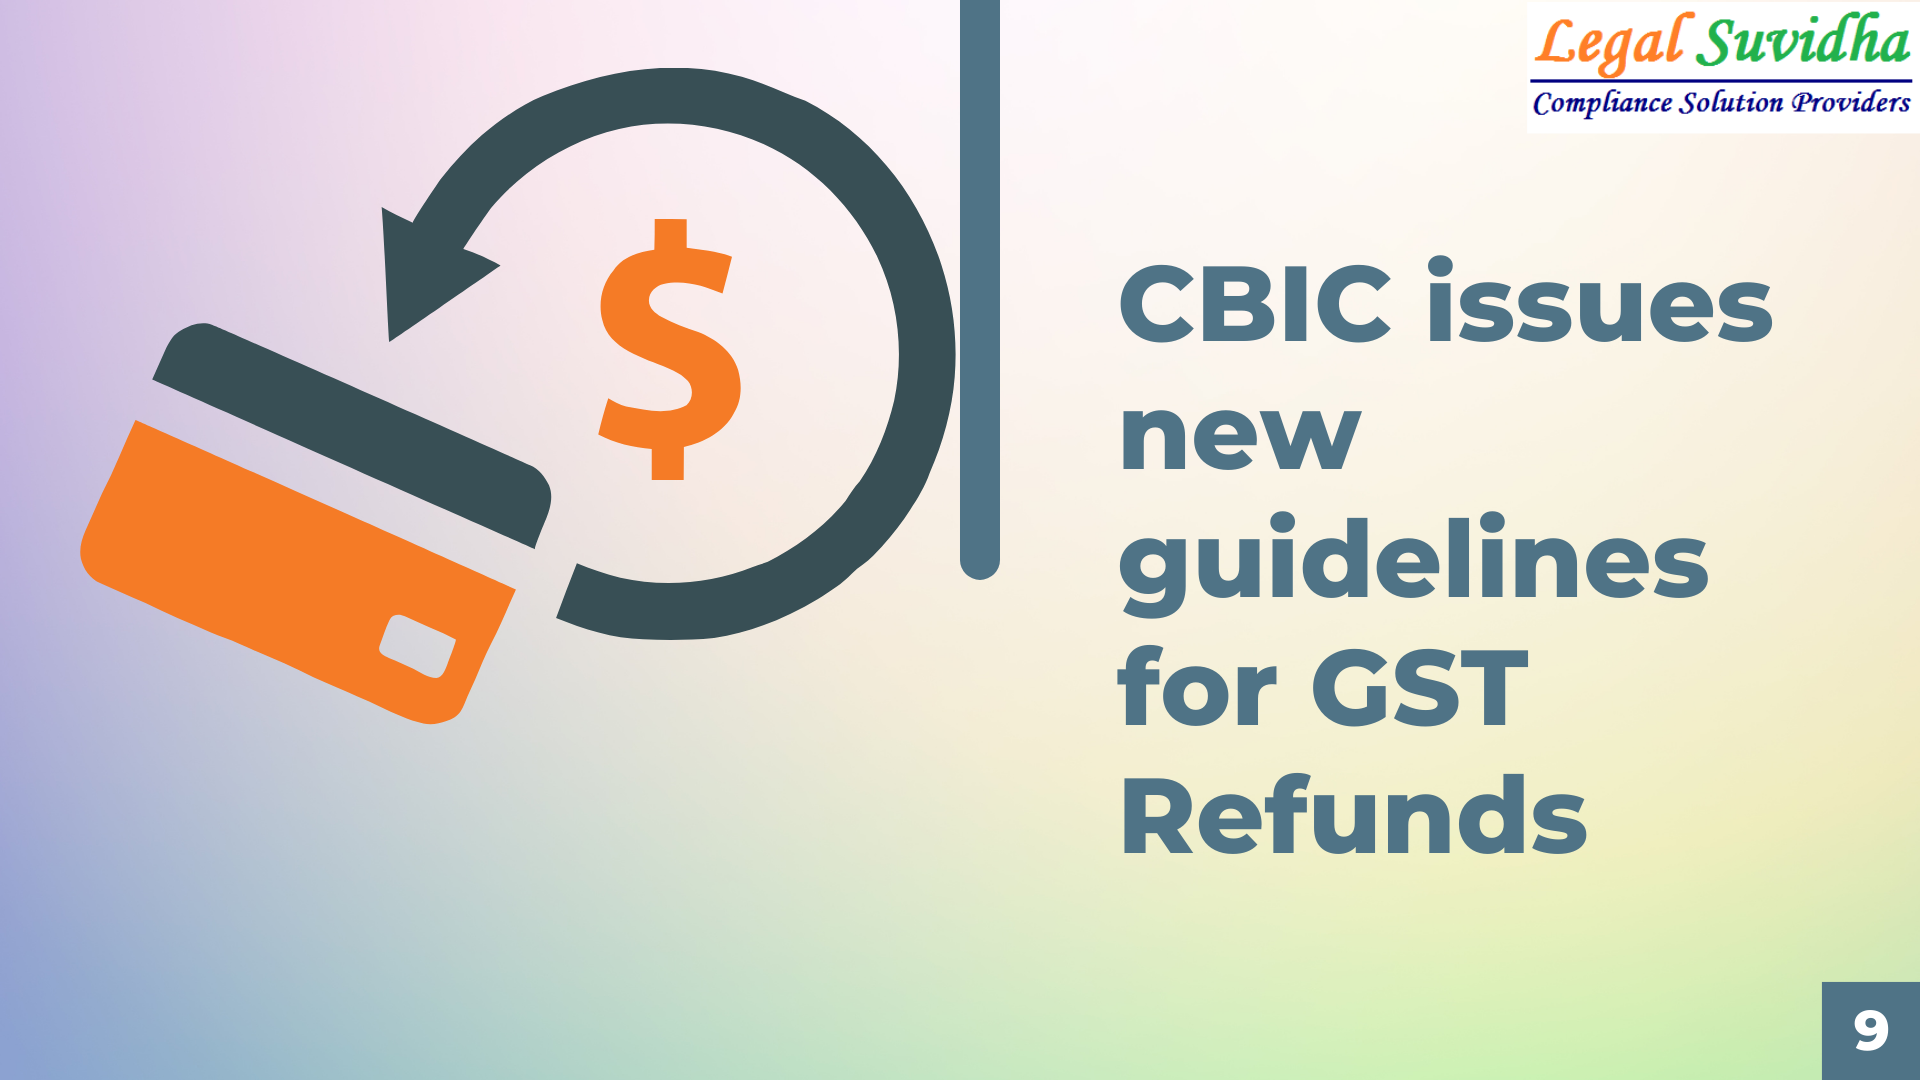 GST Refunds guidelines